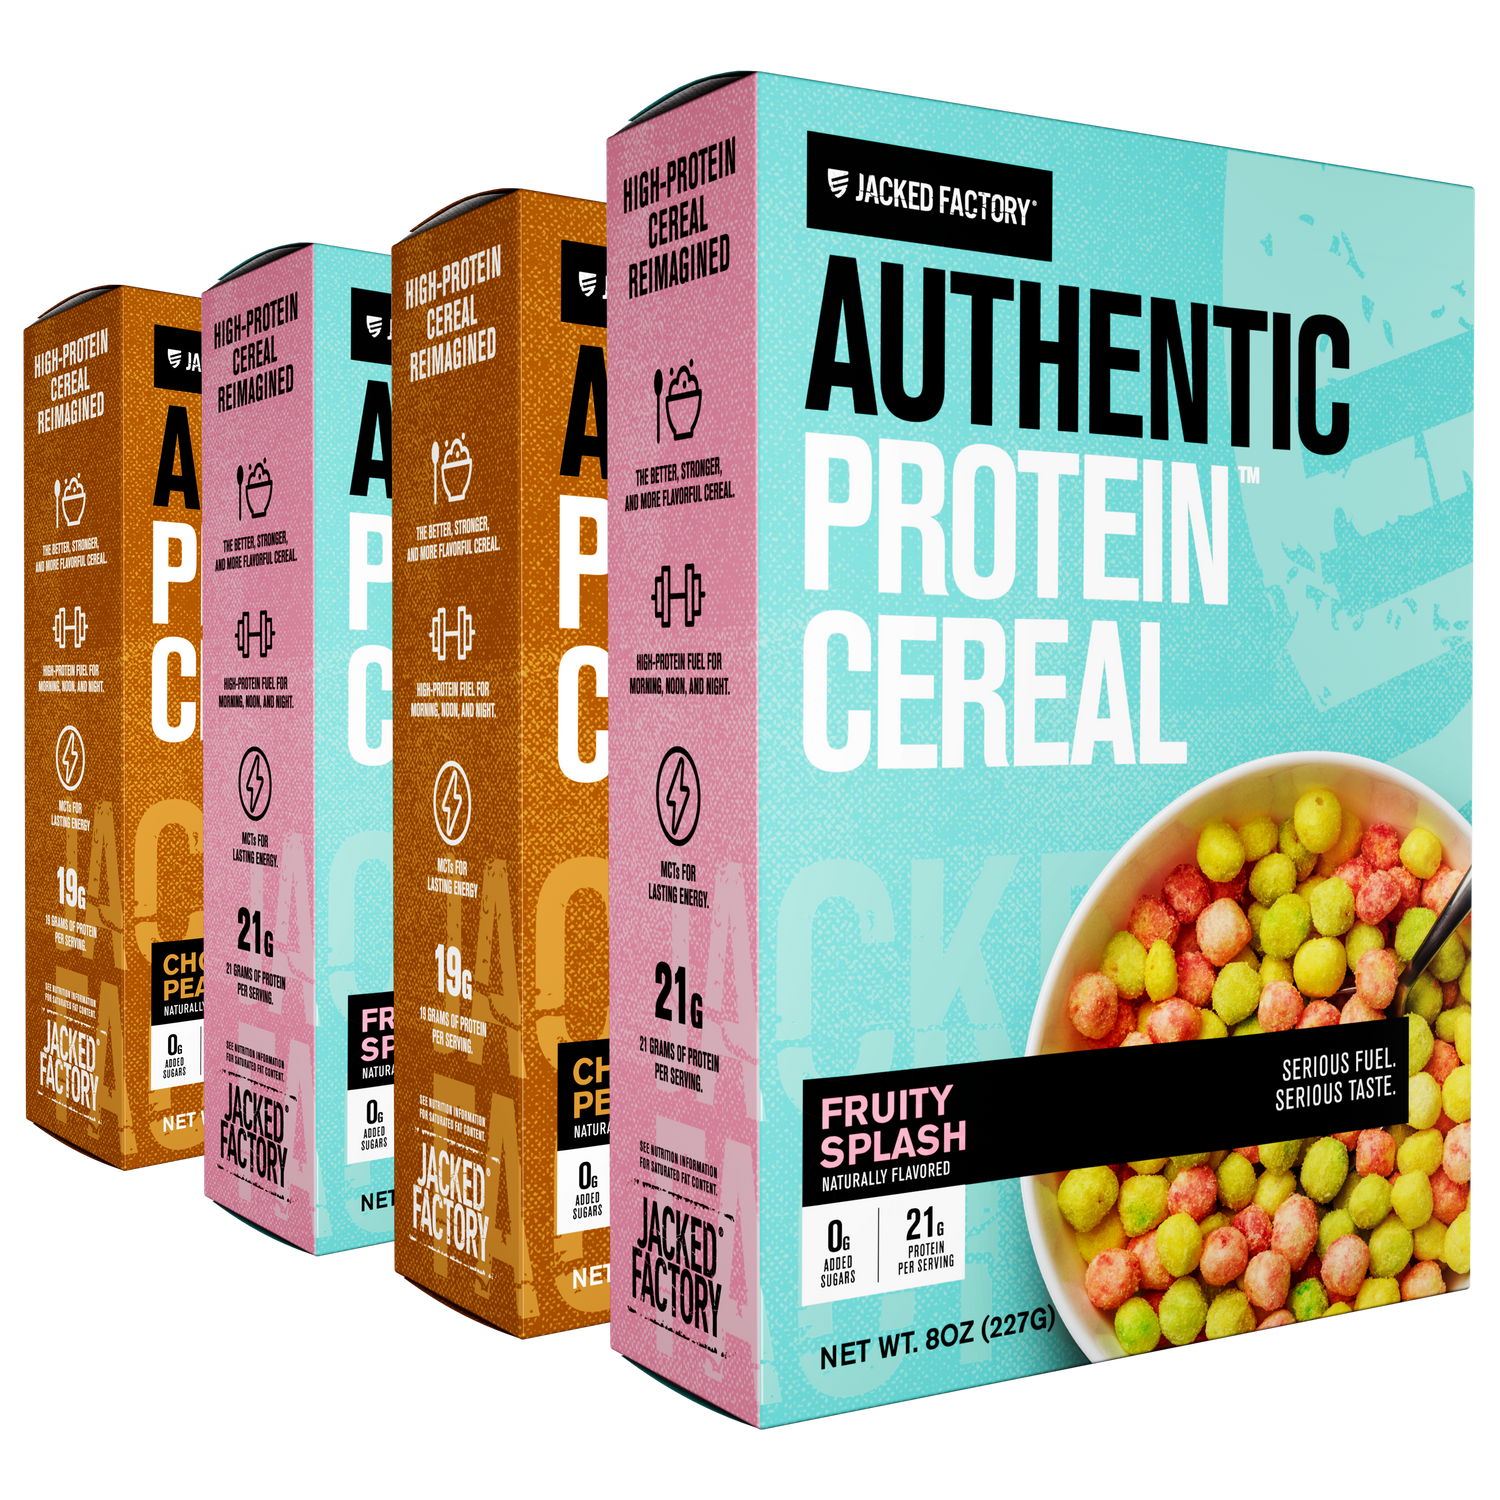 Two Boxes of Jacked Factory Authentic Protein Cereal Chocolate Peanut Butter. Brown cereal boxes with light brown accents black and white text. Two Boxes of Jacked Factory Authentic Protein Cereal Fruity Splash. Blue cereal boxes with pink accents black and white text